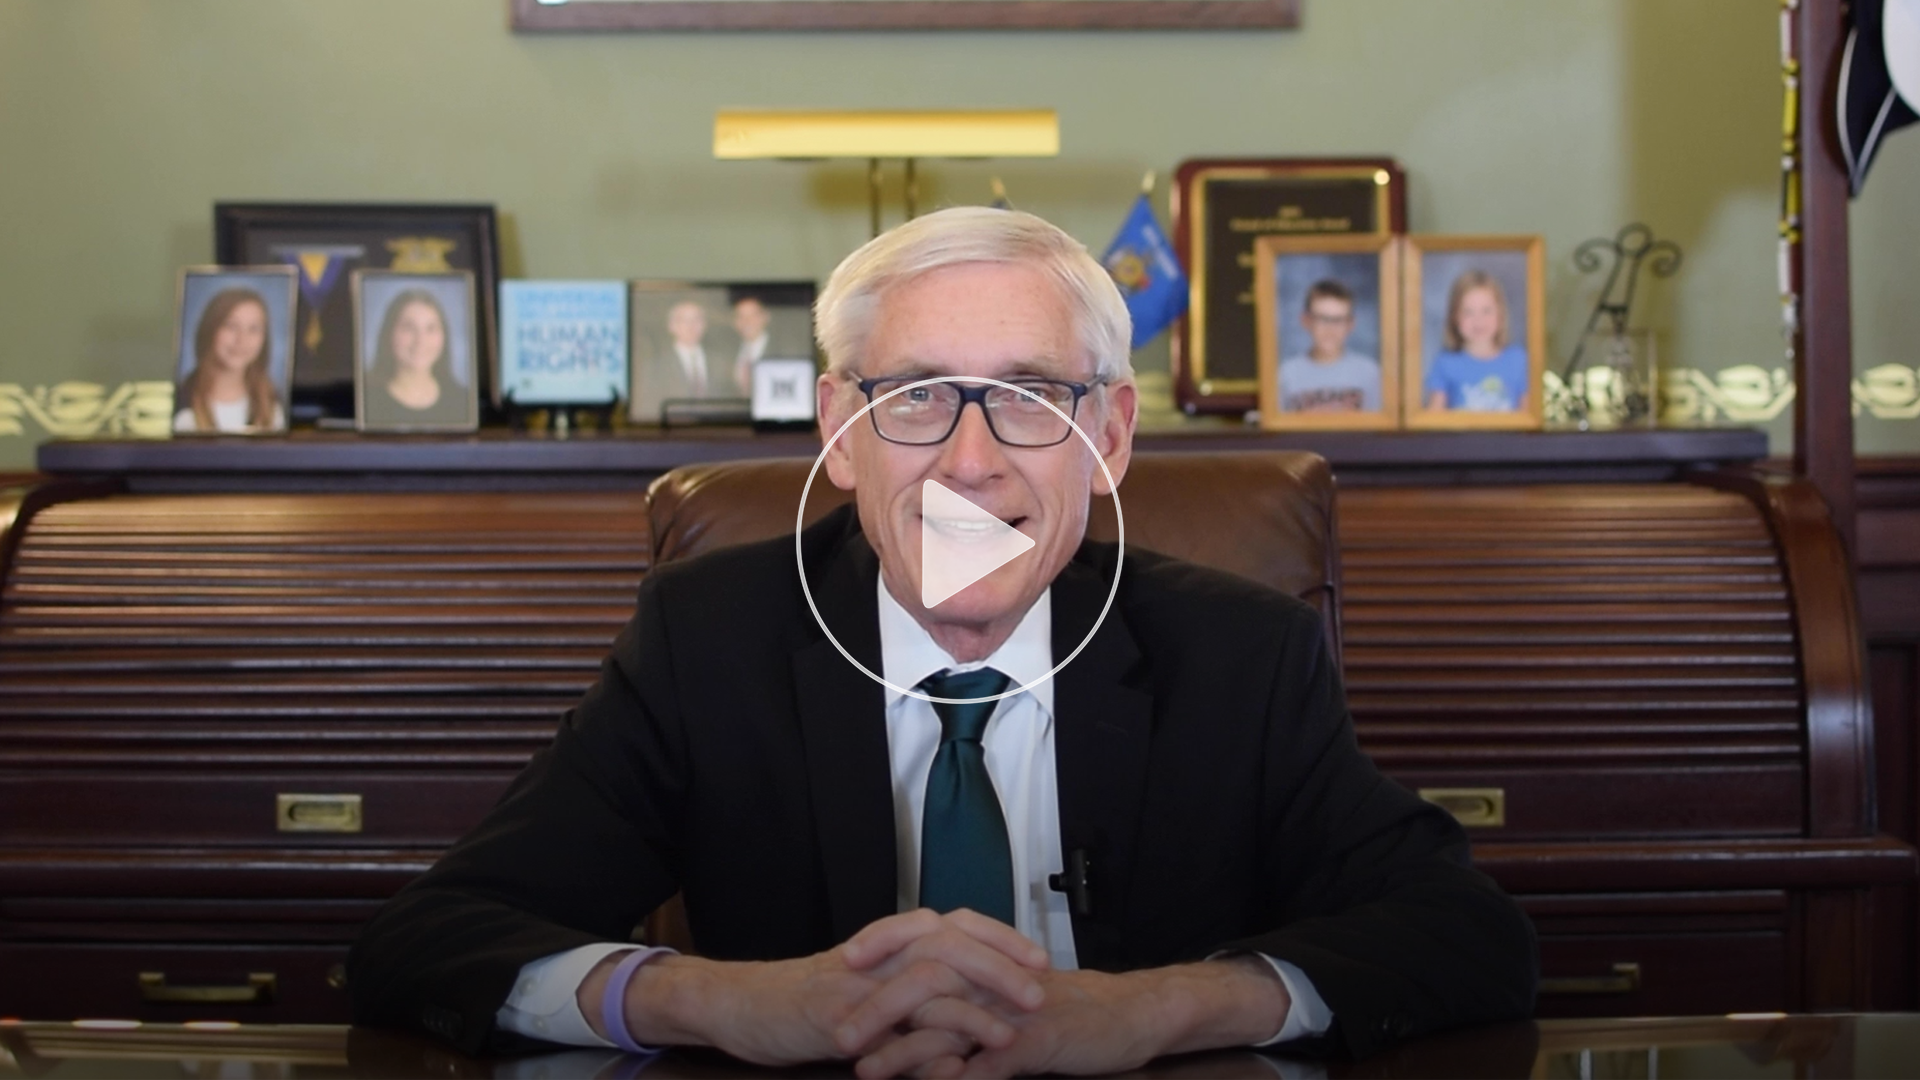 Photo of Gov. Evers at his desk with a video play button.